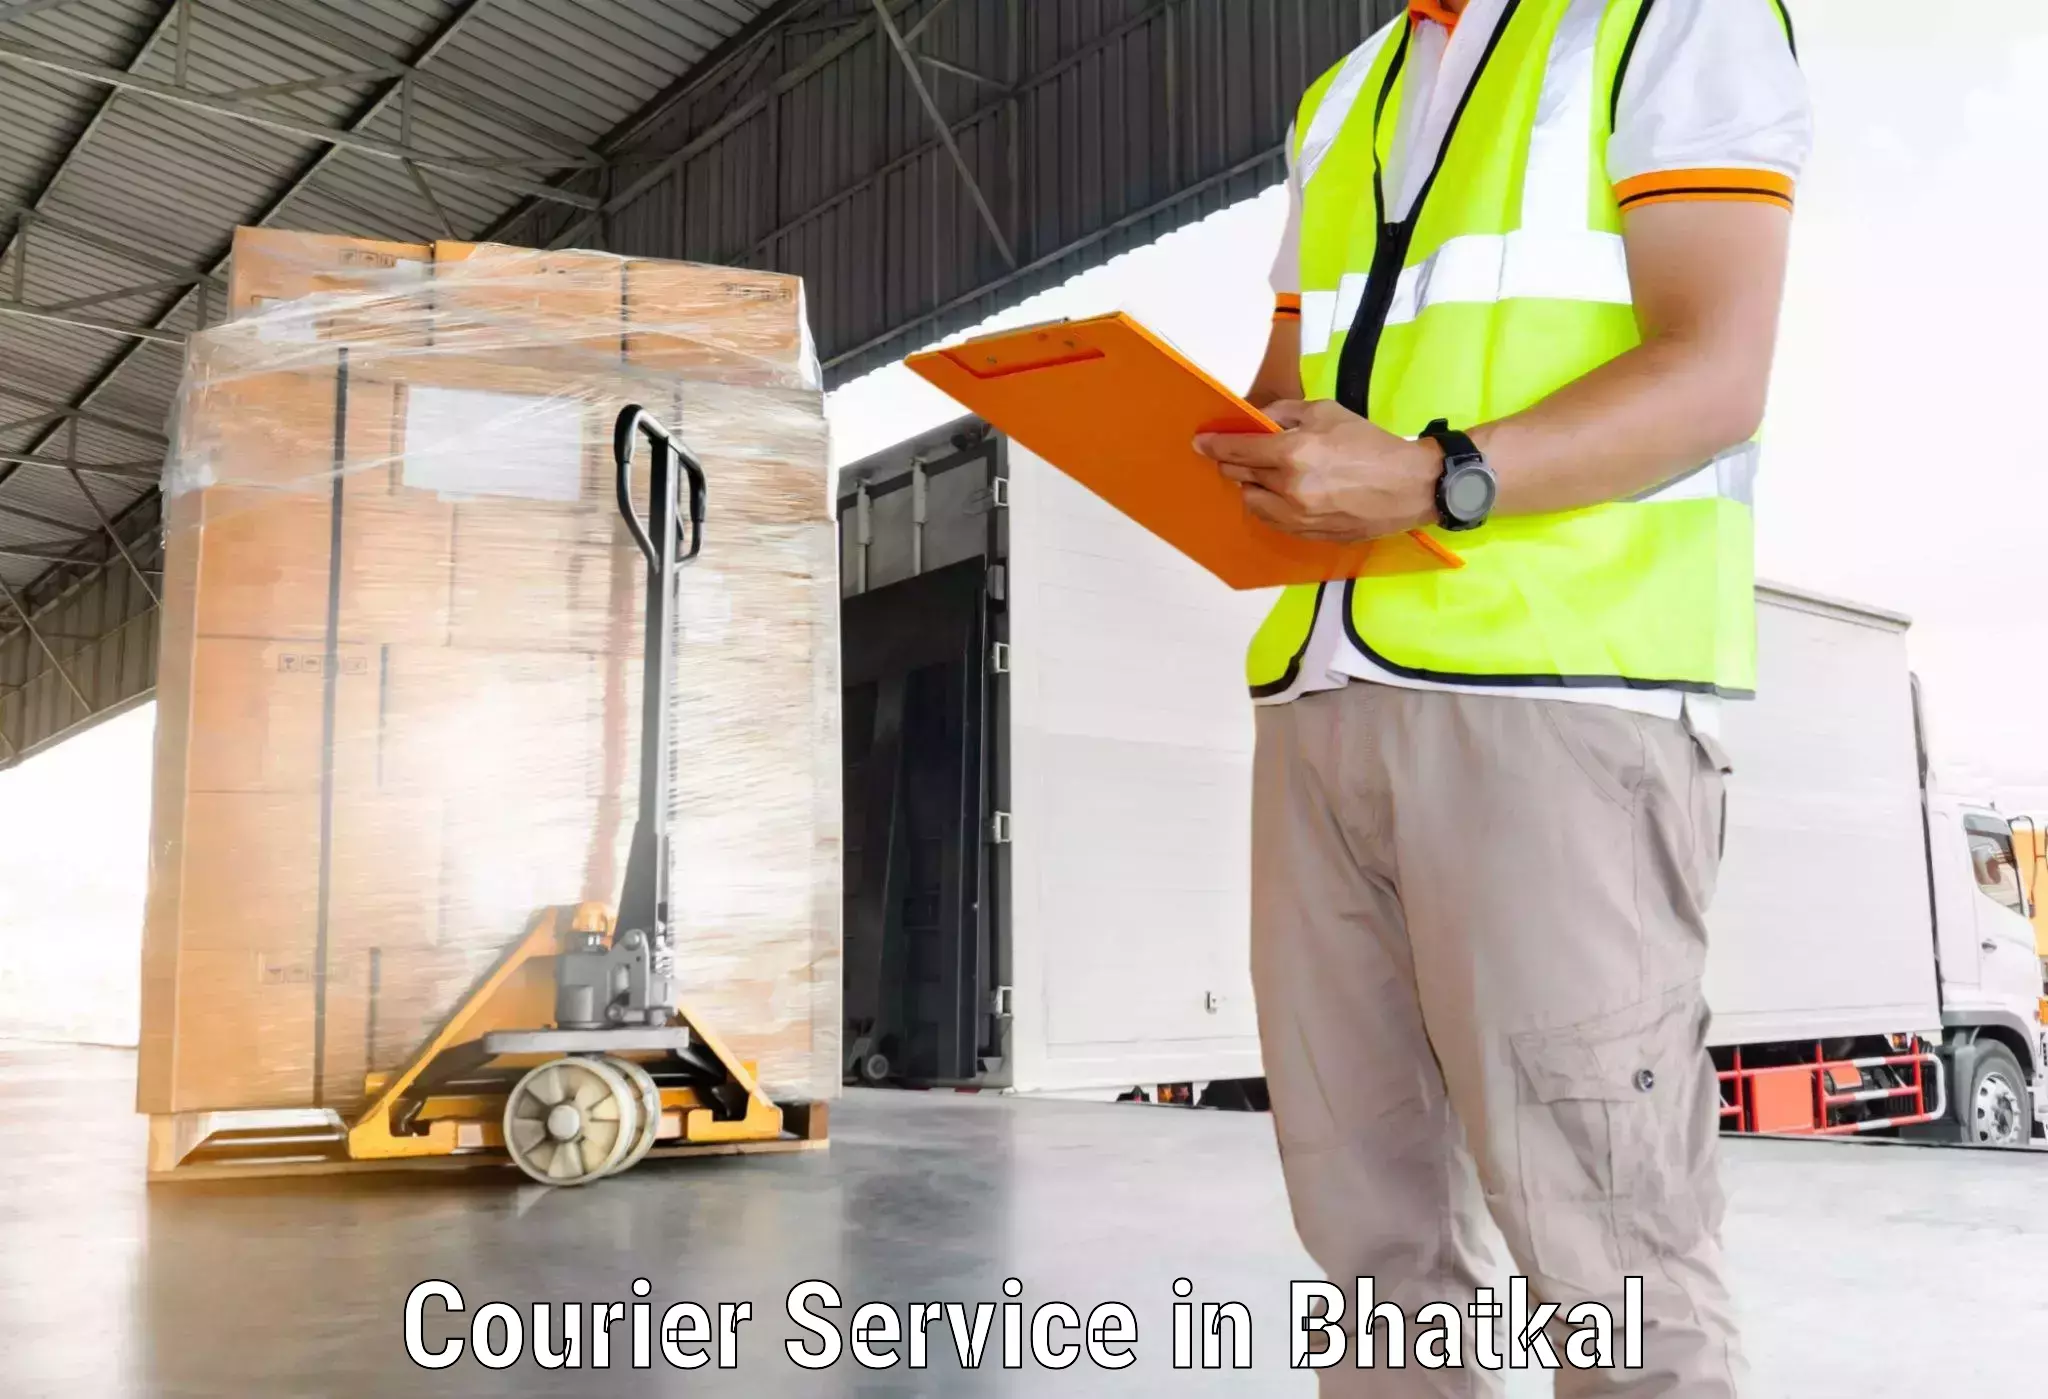 Customer-focused courier in Bhatkal